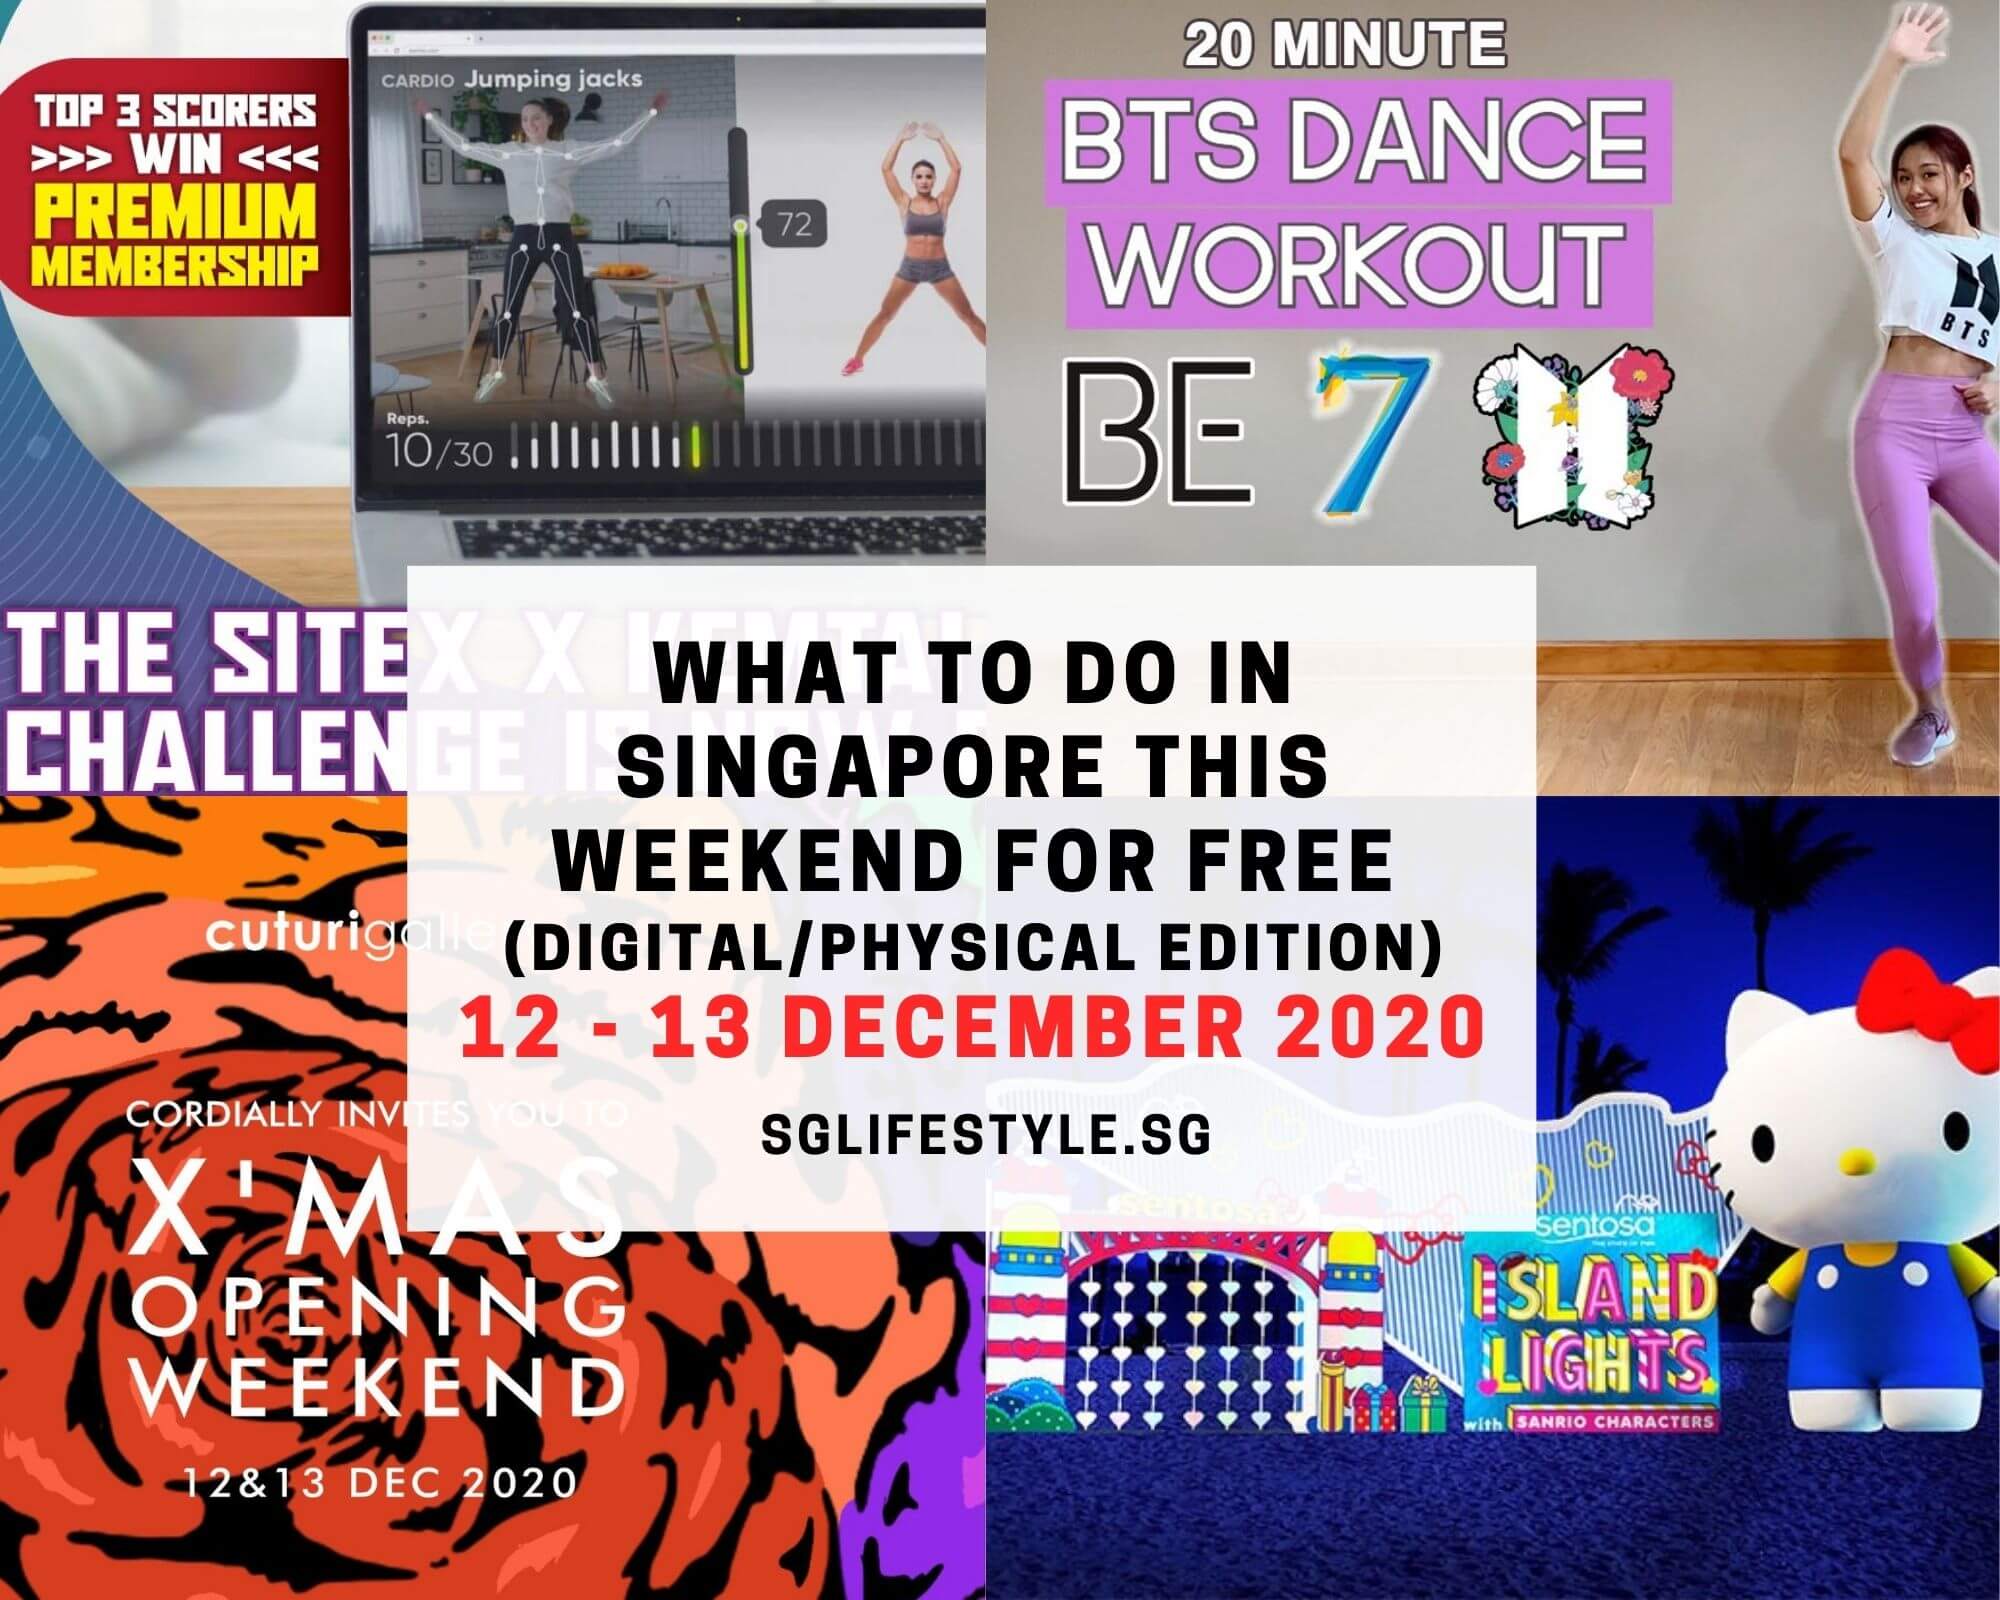 what to do singapore weekend free december 2020